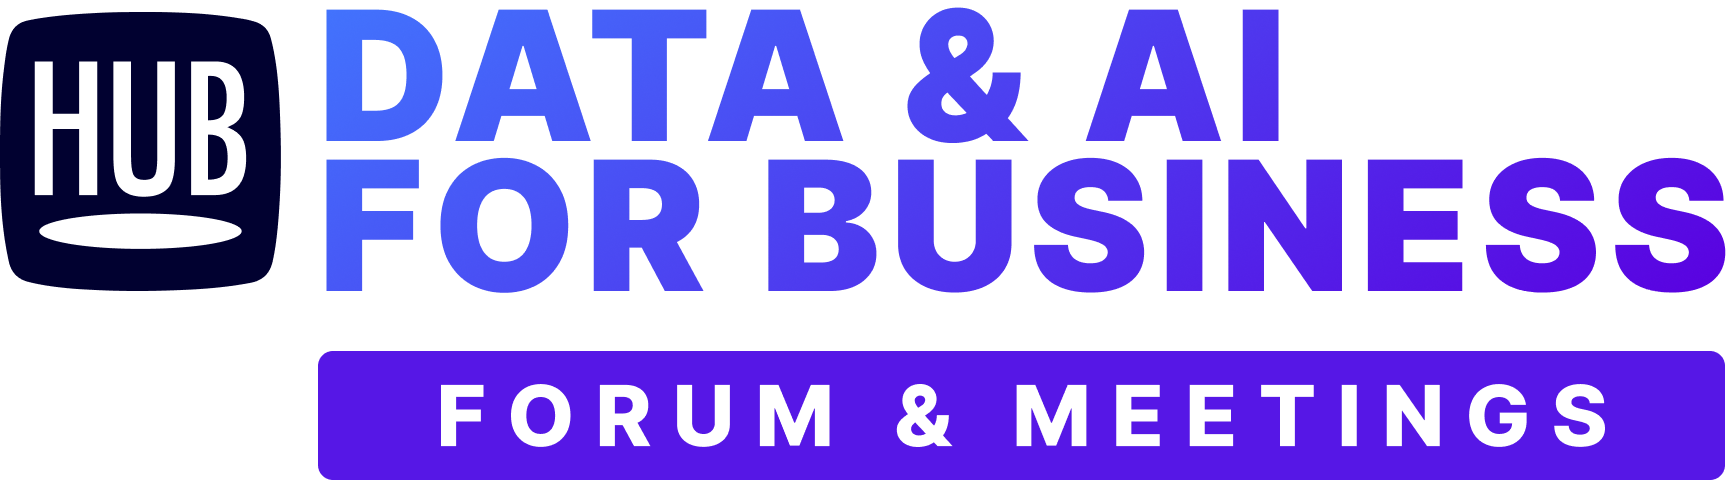 DATA & AI FOR BUSINESS Forum & Meetings